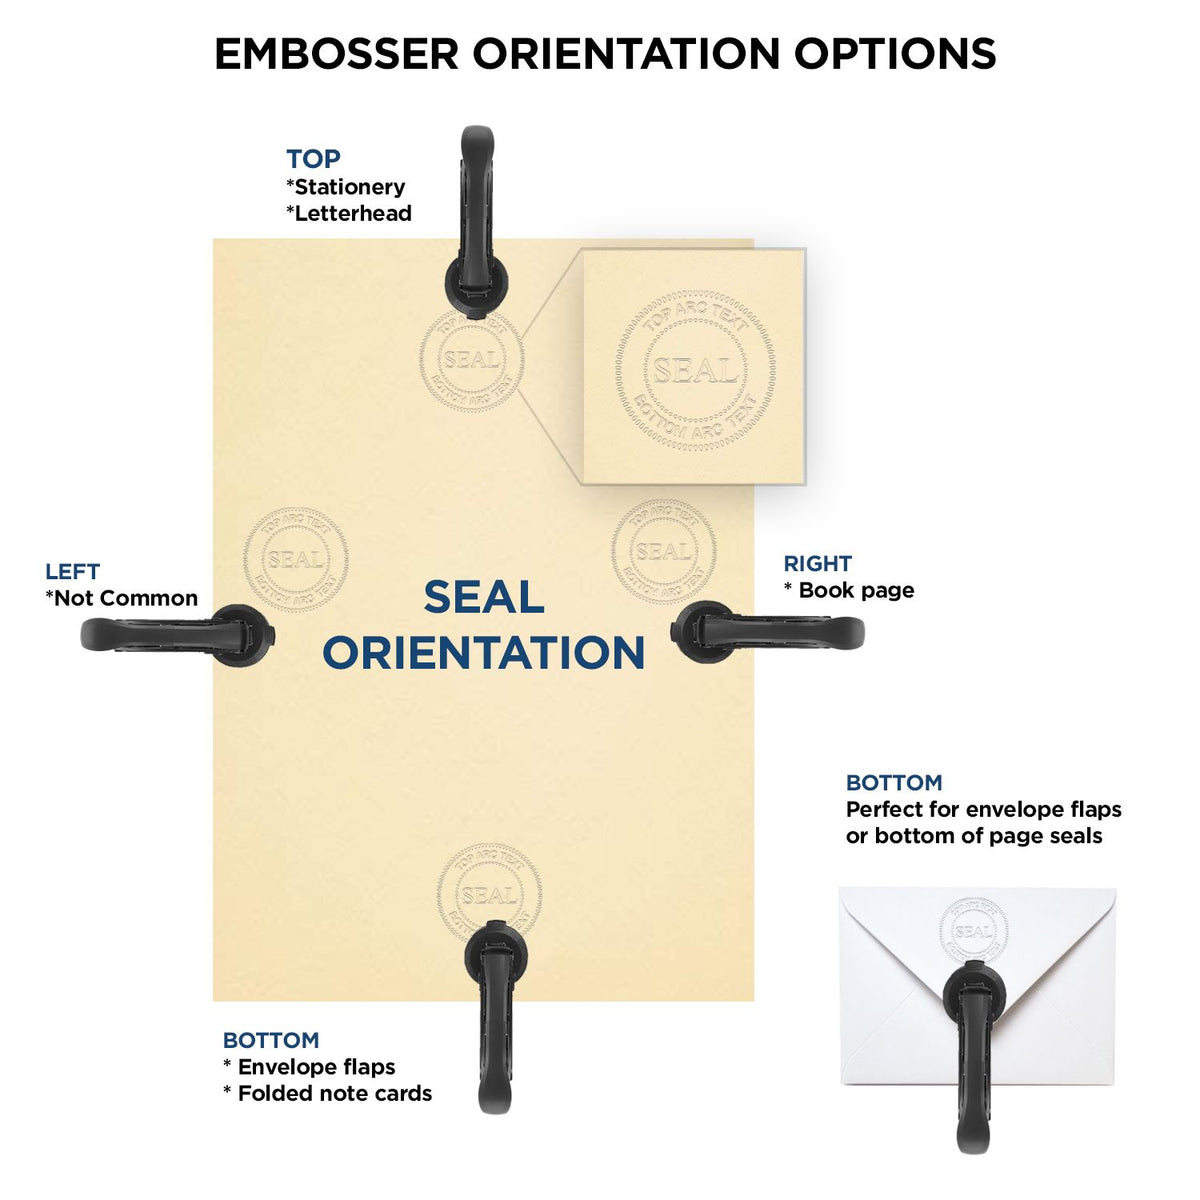 An infographic for the State of Rhode Island Long Reach Architectural Embossing Seal showing embosser orientation, this is showing examples of a top, bottom, right and left insert.